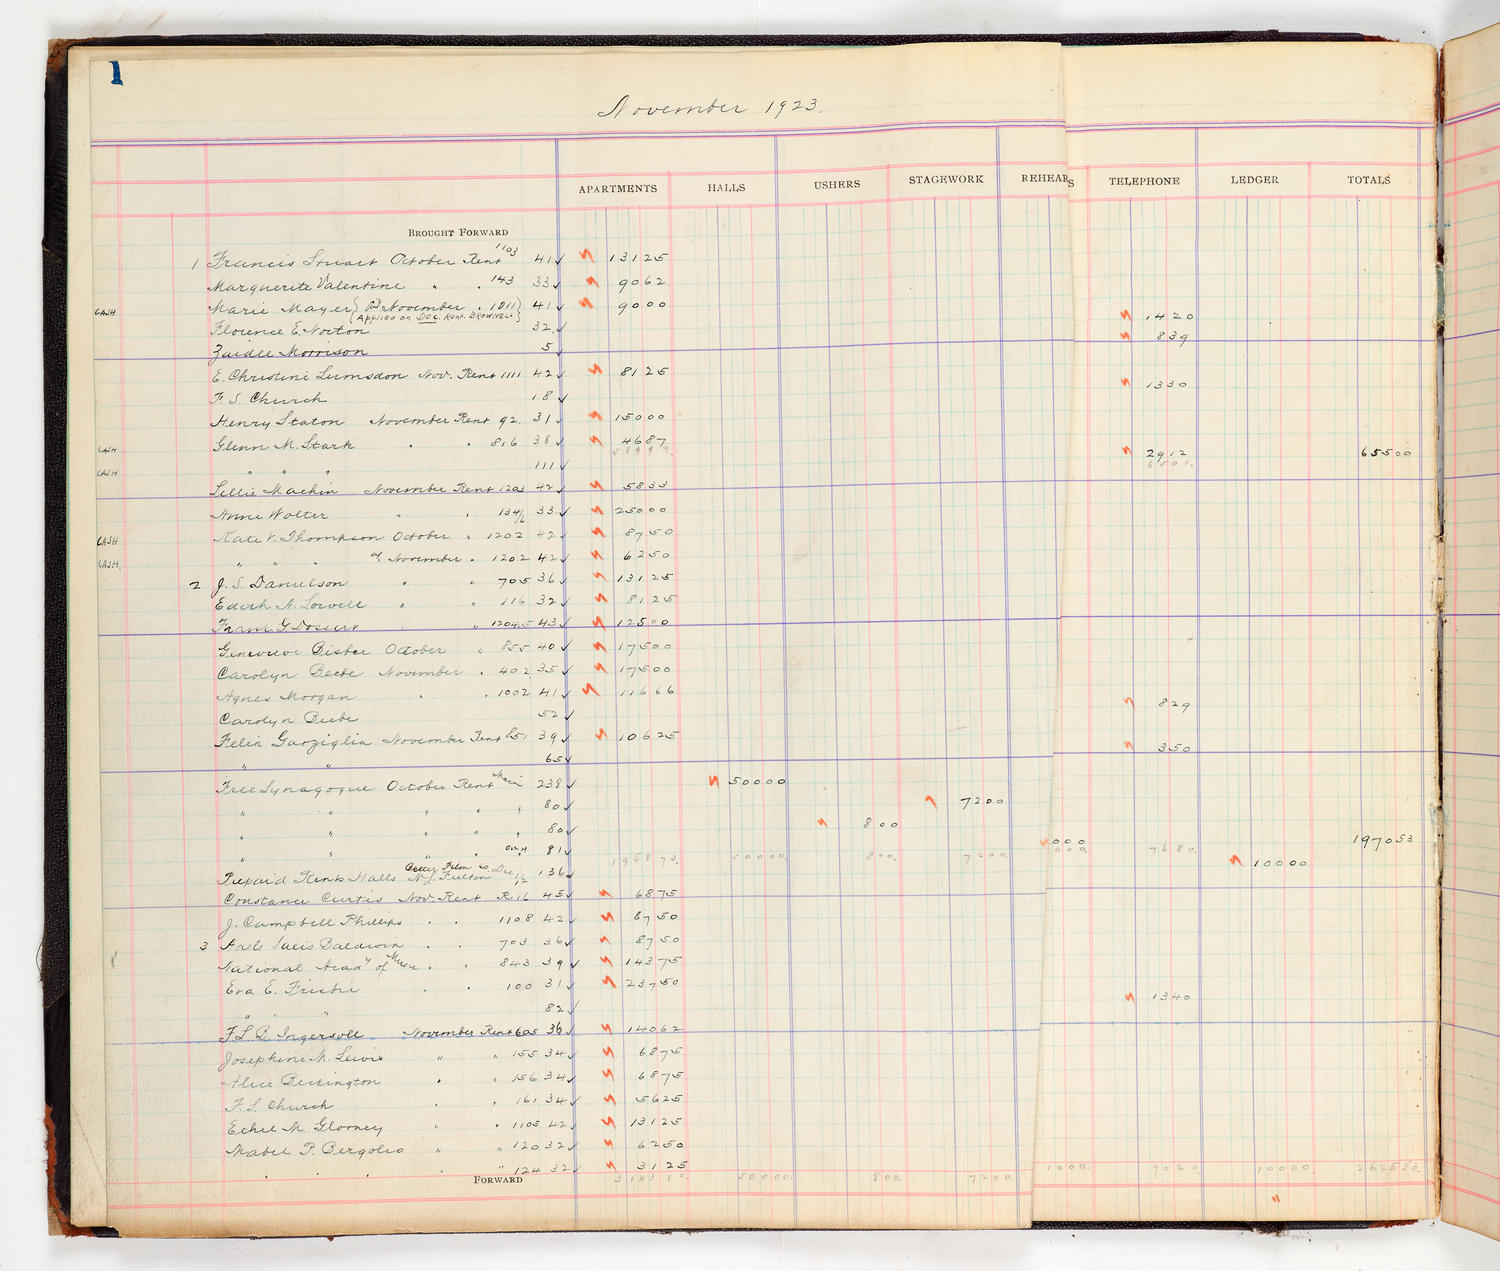 Music Hall Accounting Ledger Cash Book, volume 8, page 1a